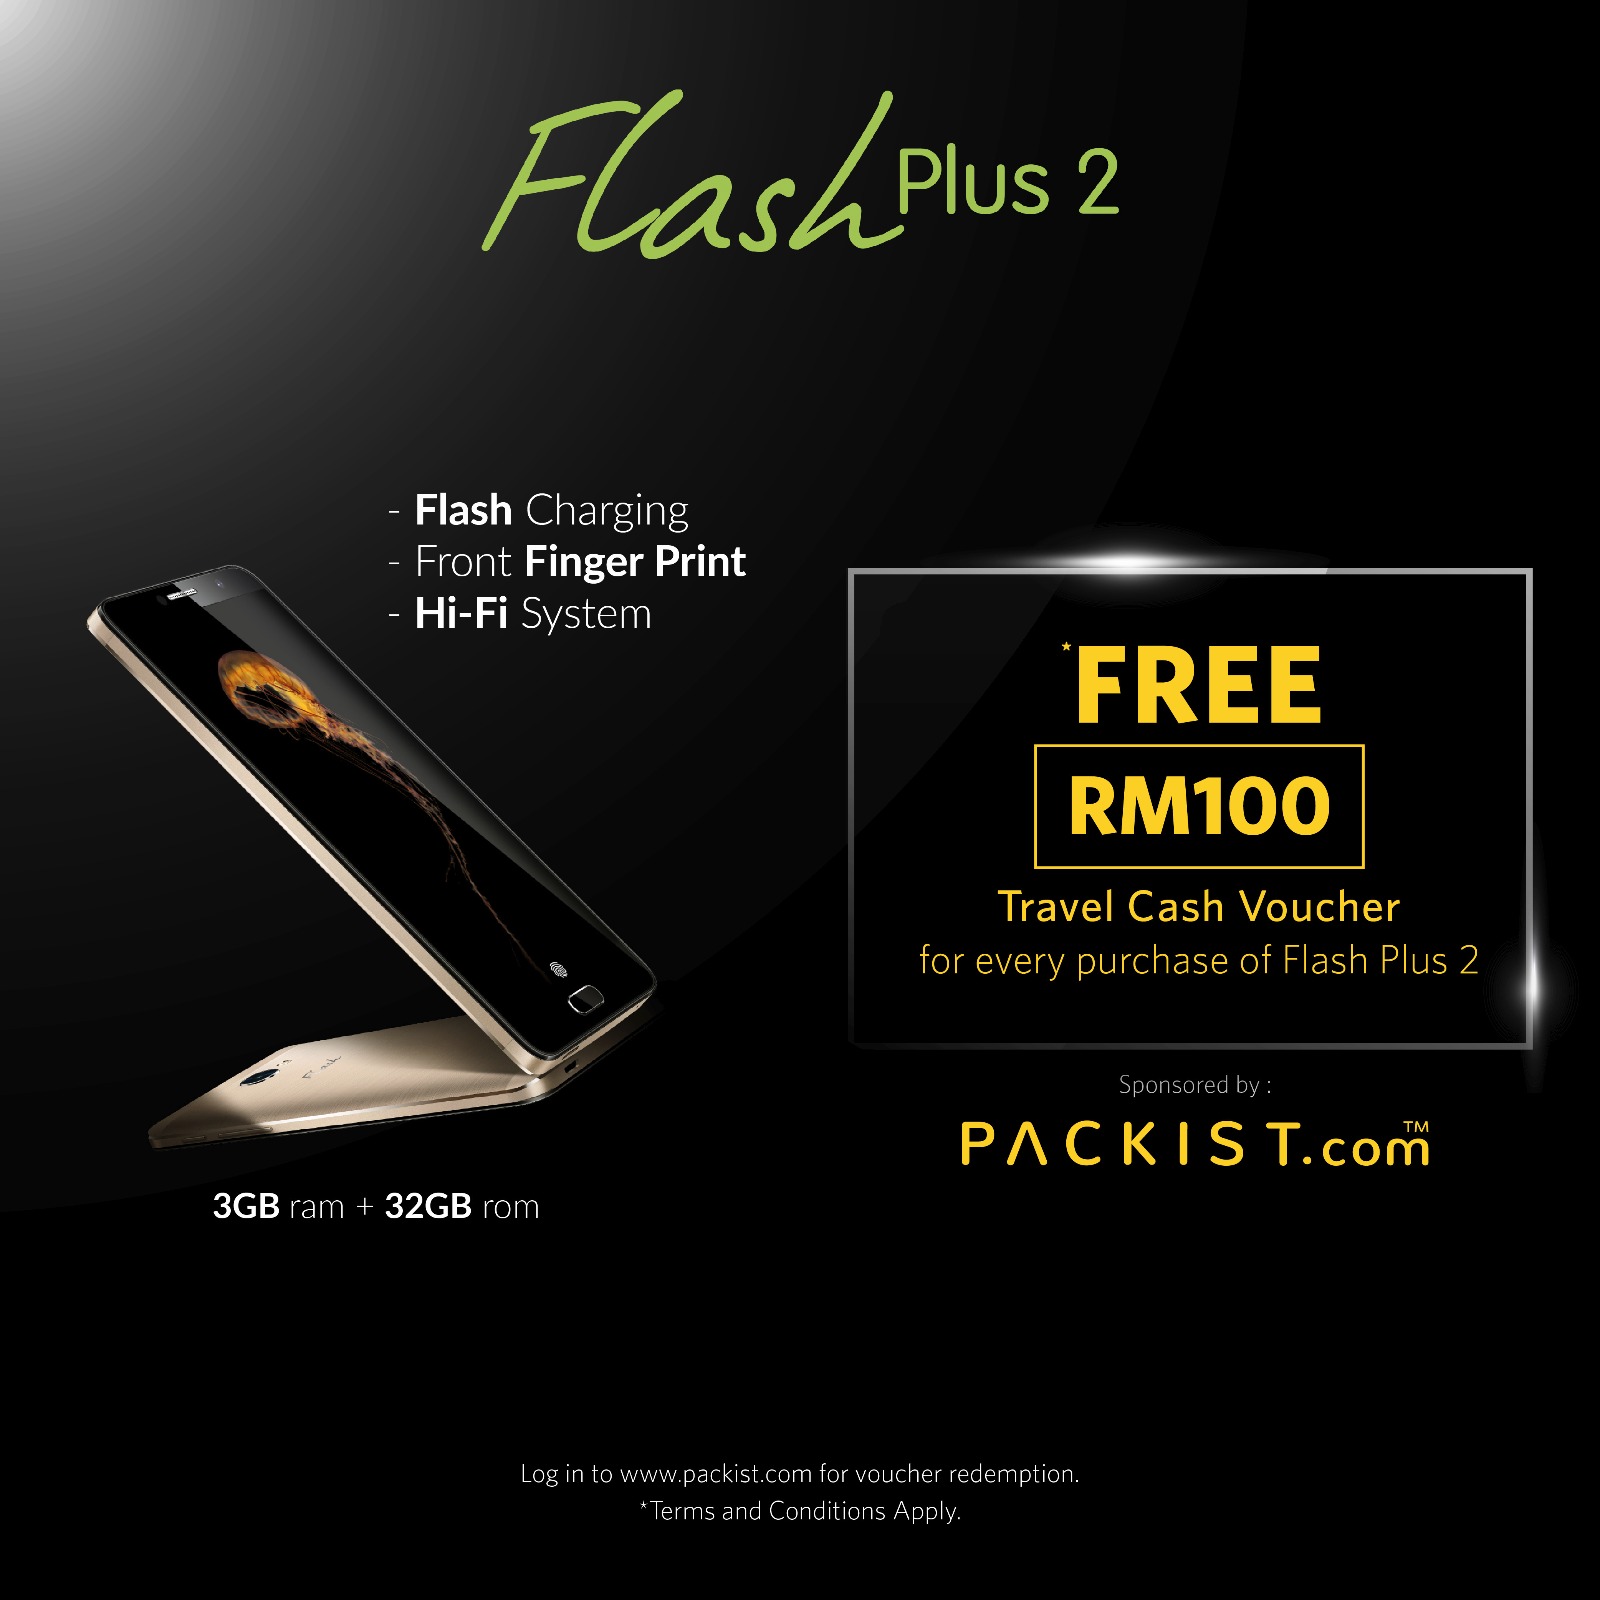 Get RM100 travel voucher when you purchase the Flash Plus 2